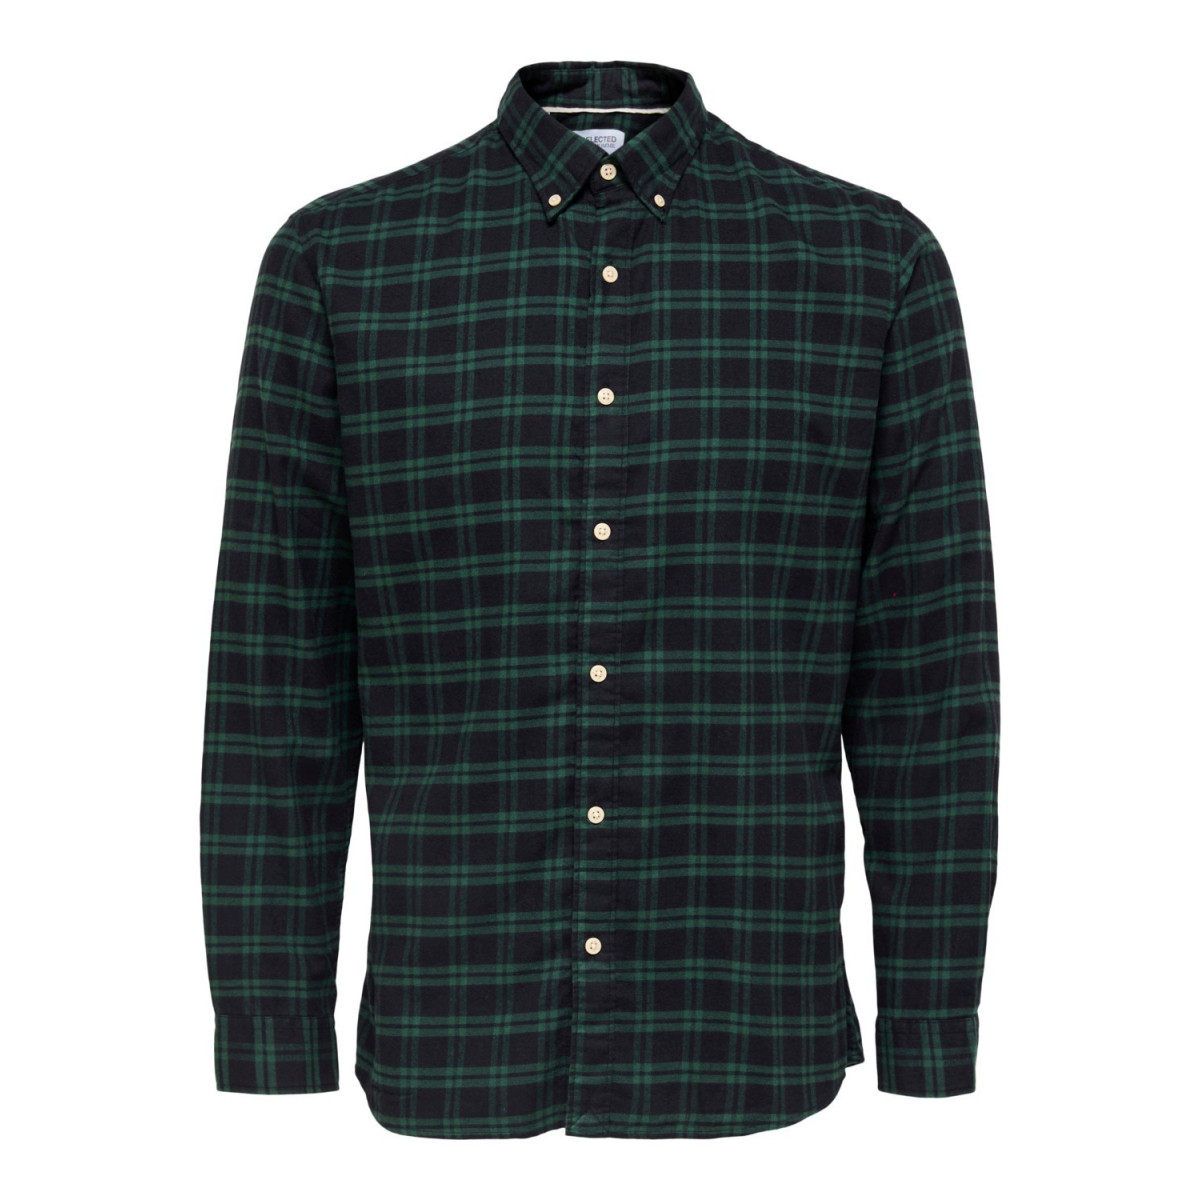 SLHSLIMFLANNEL SHIRT Sycamore Normal